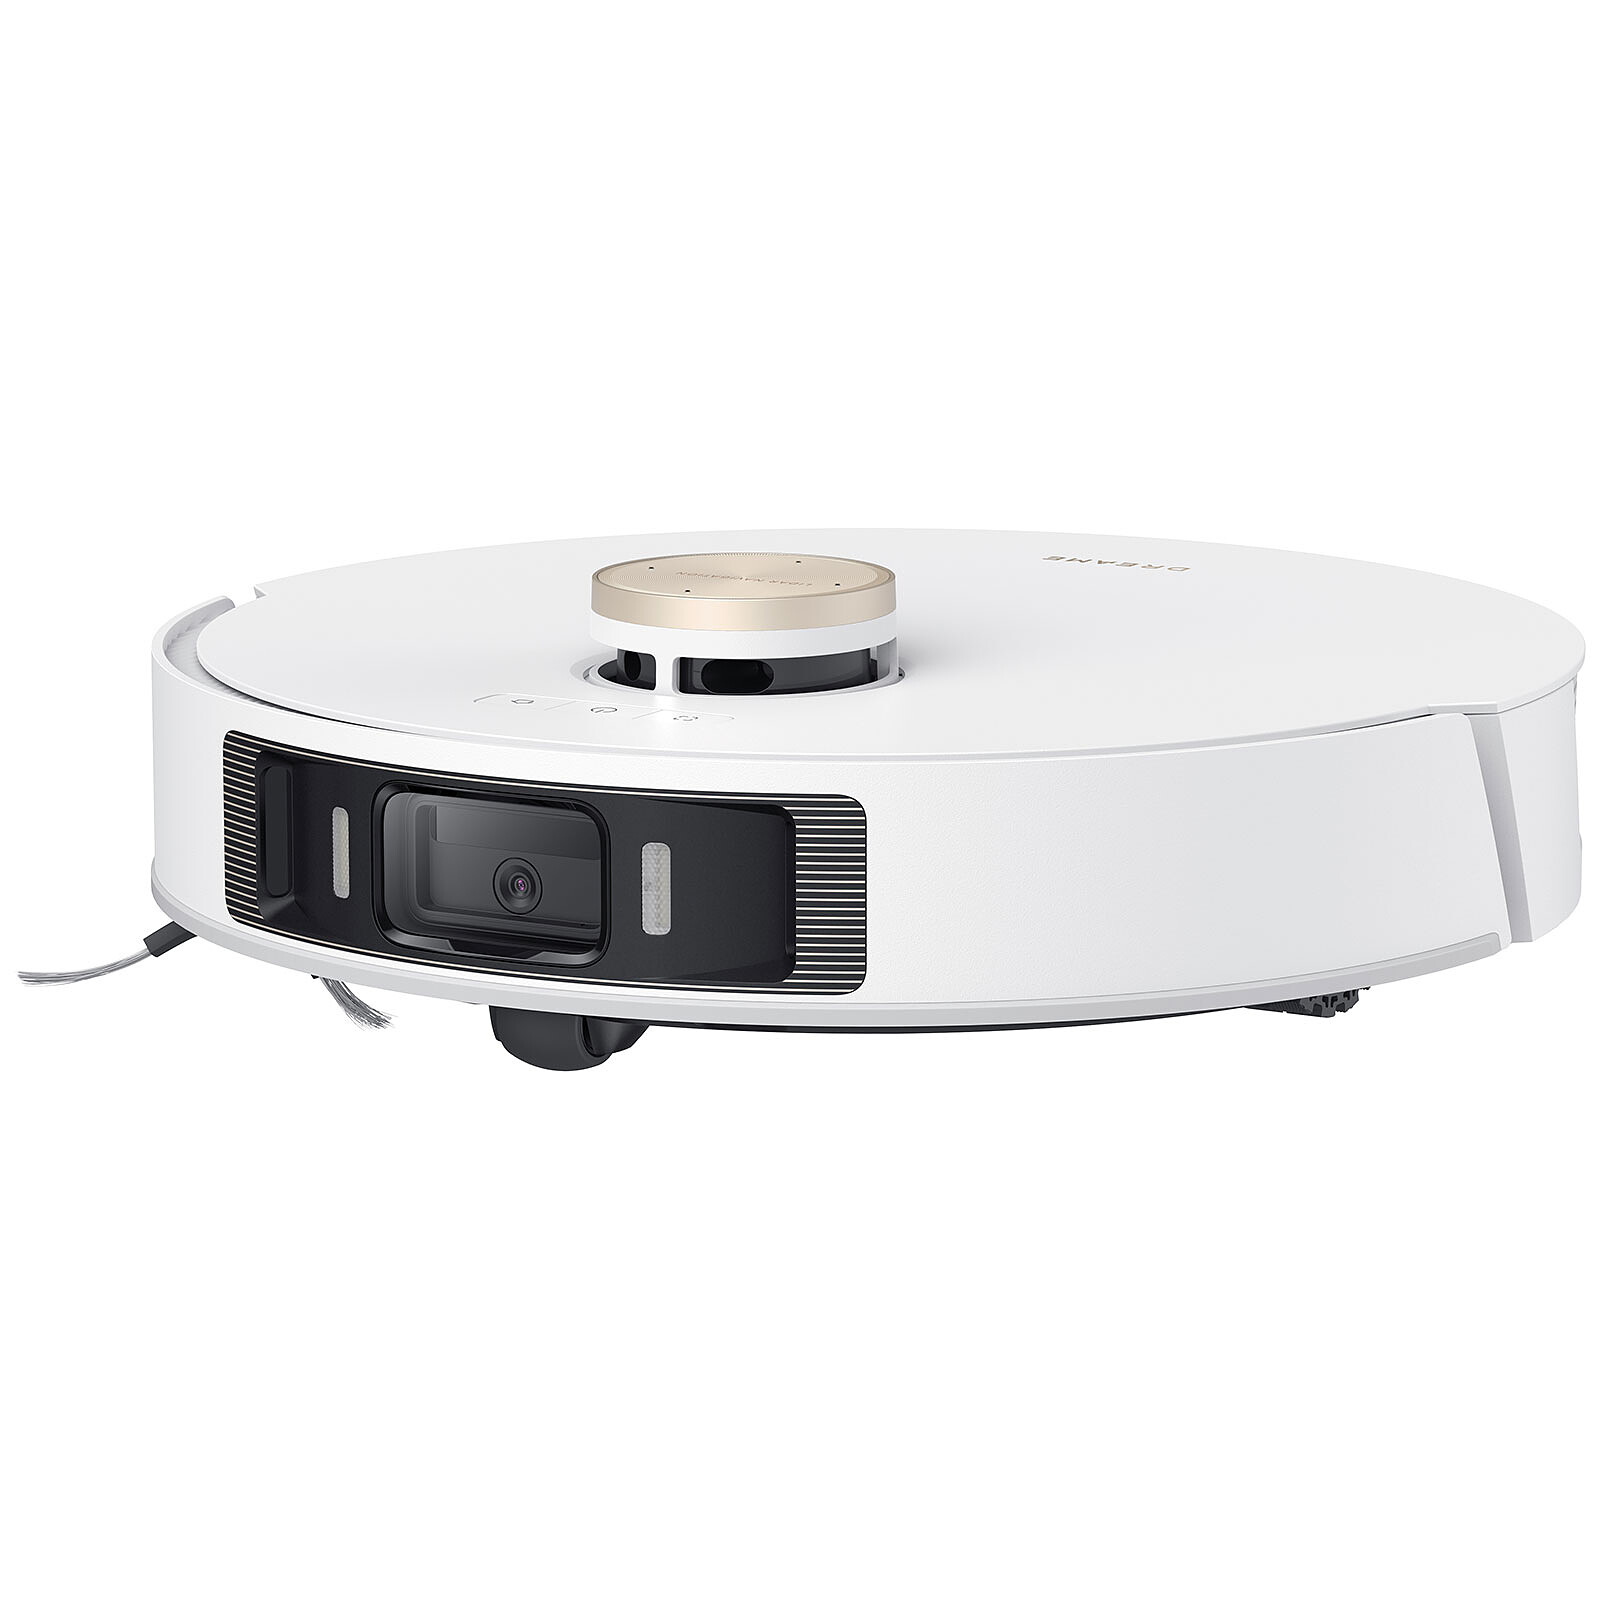 Dreame L20 Ultra - Robot and vacuum cleaner - LDLC 3-year warranty